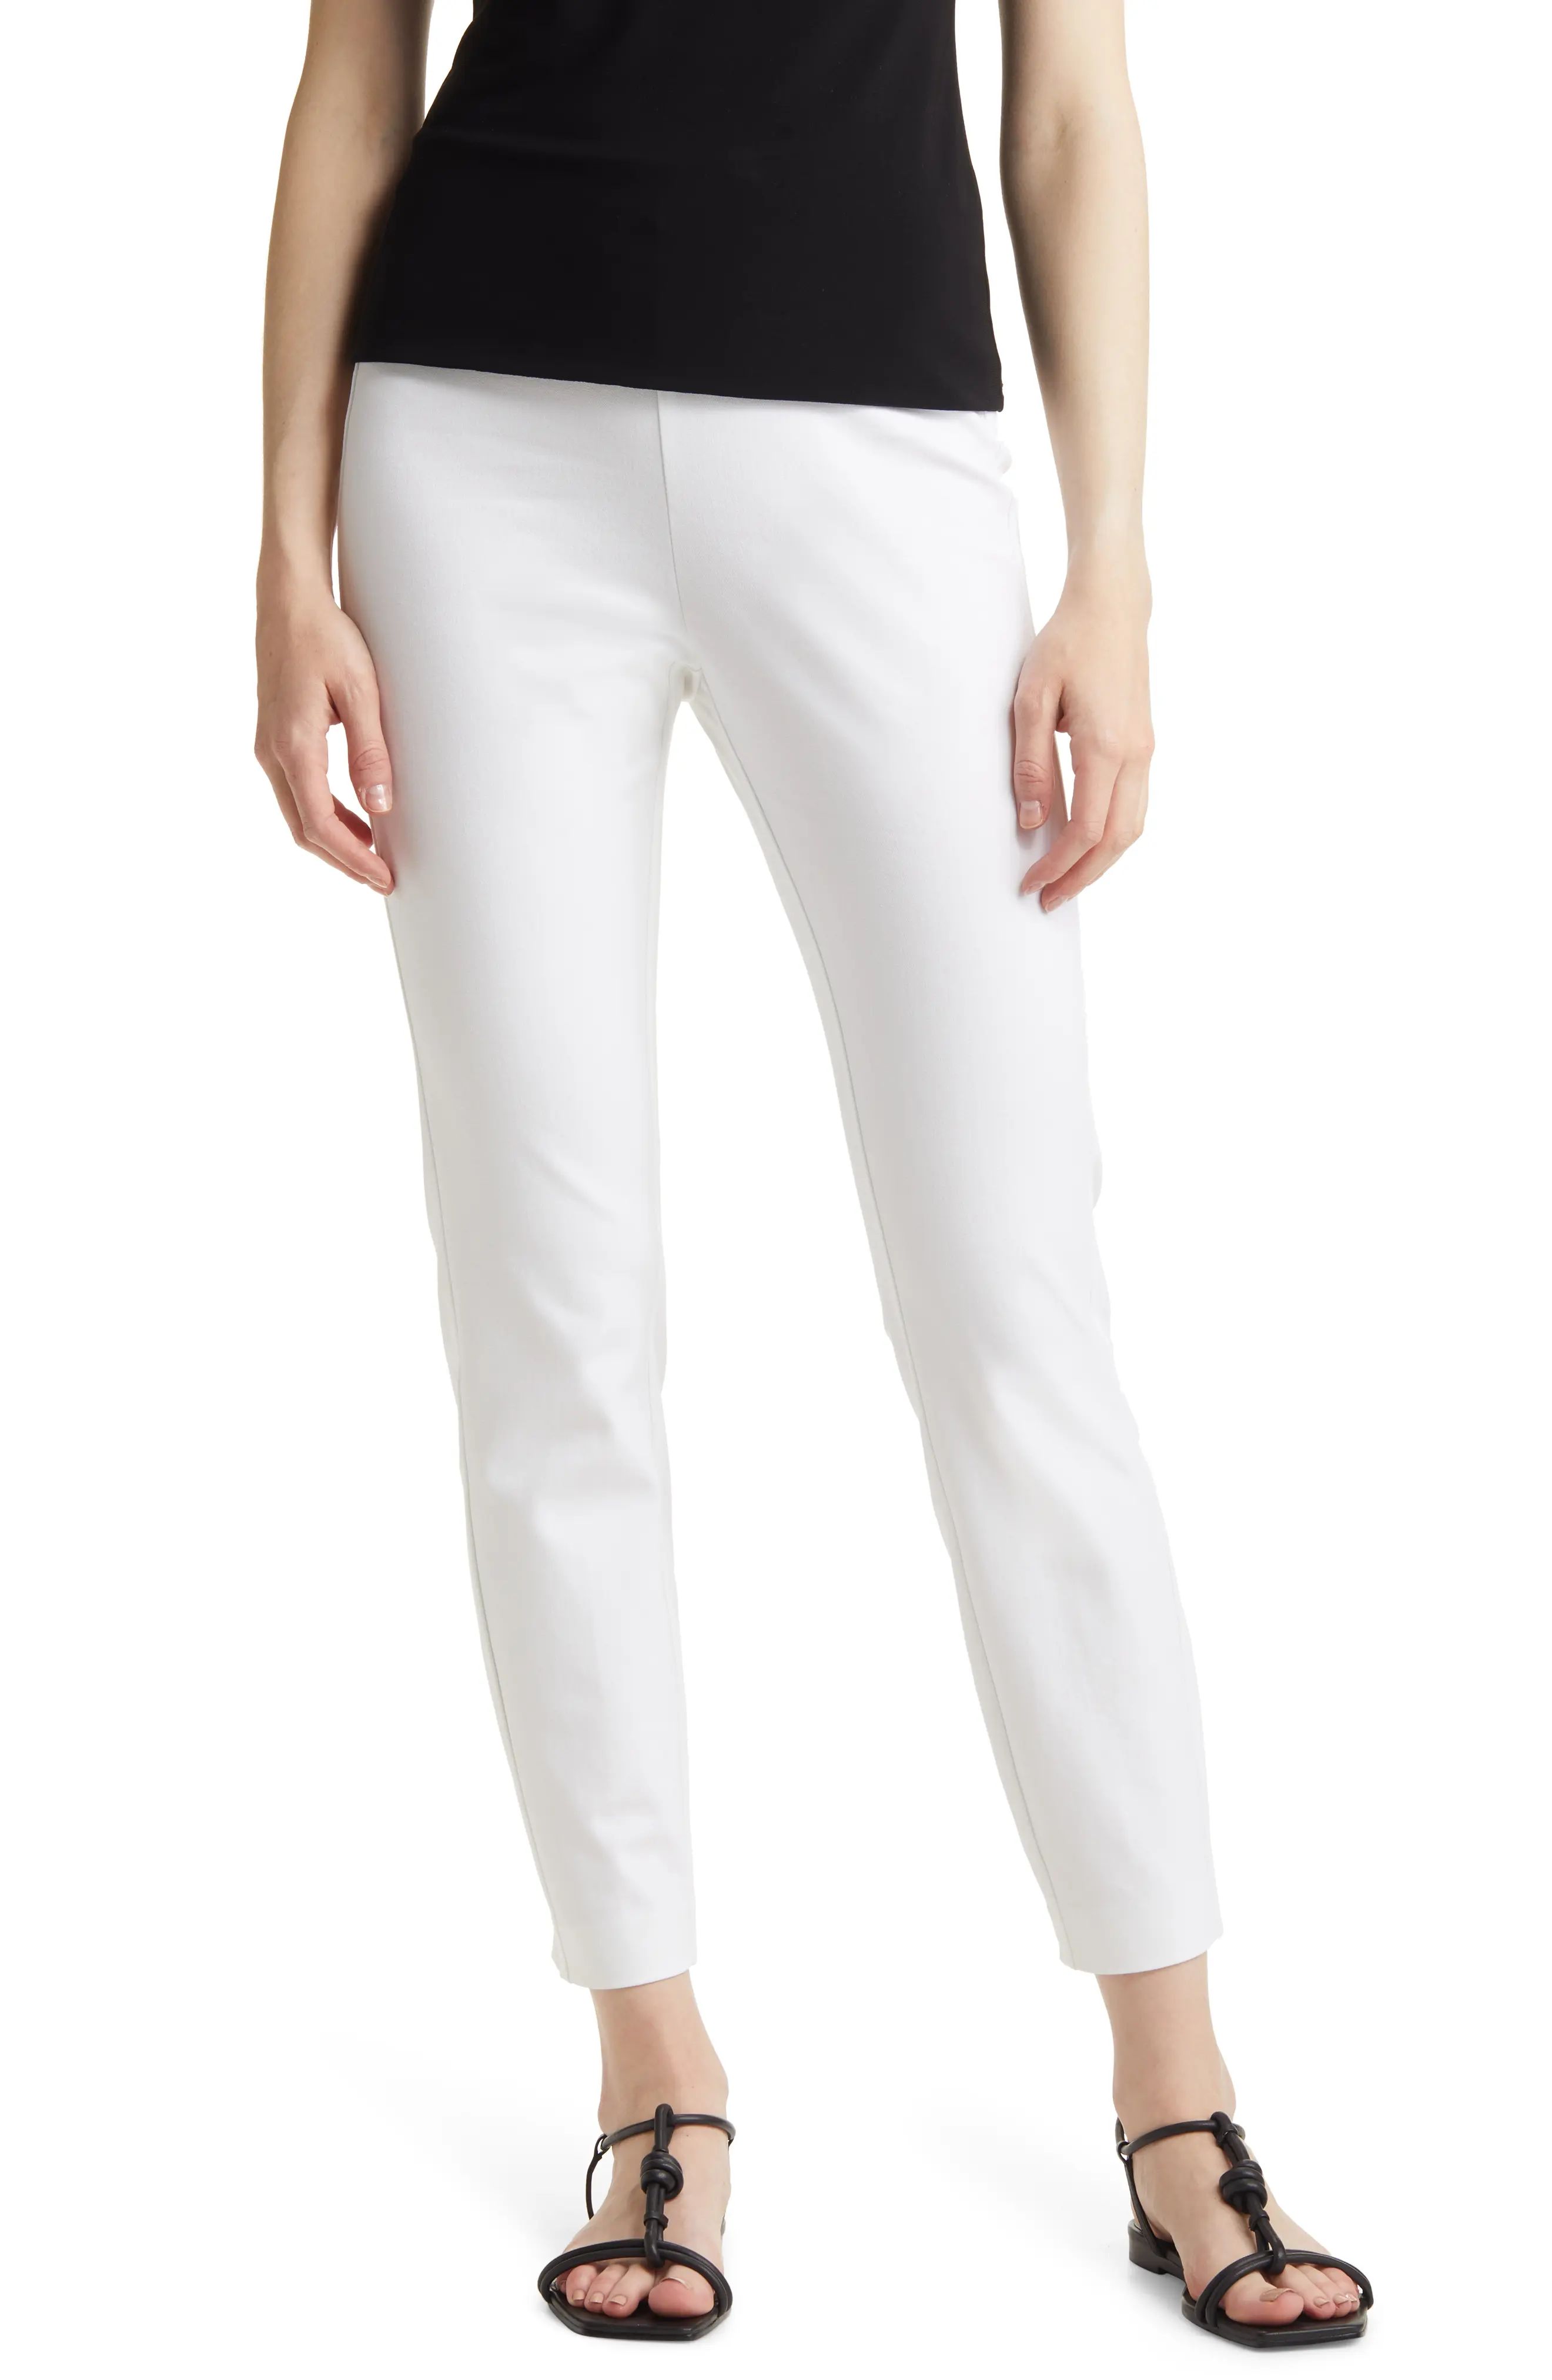 Nordstrom Everyday Skinny Fit Stretch Cotton Ankle Pants in White at Nordstrom, Size 18 | Nordstrom